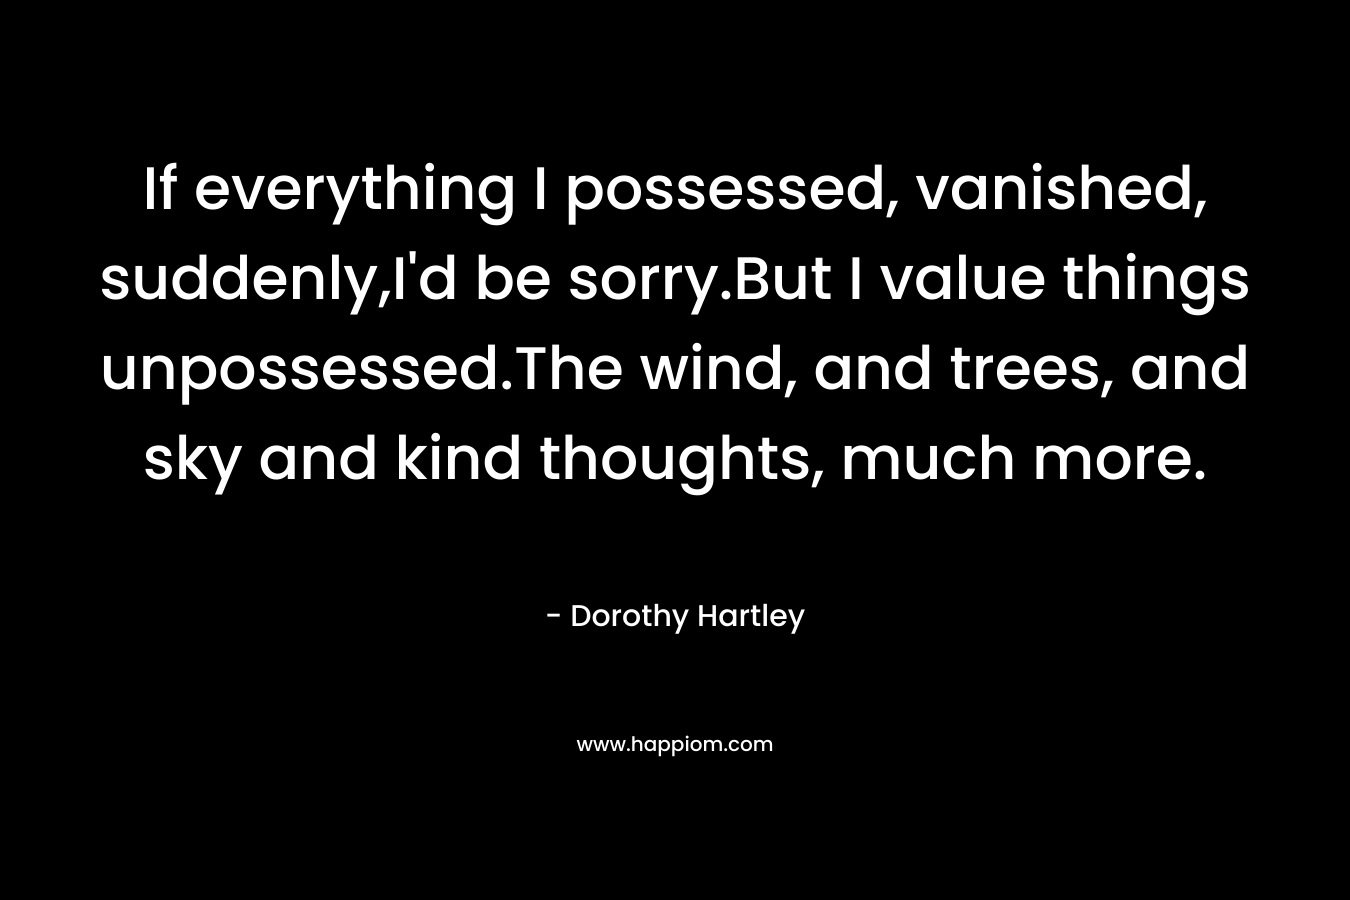 If everything I possessed, vanished, suddenly,I’d be sorry.But I value things unpossessed.The wind, and trees, and sky and kind thoughts, much more. – Dorothy Hartley